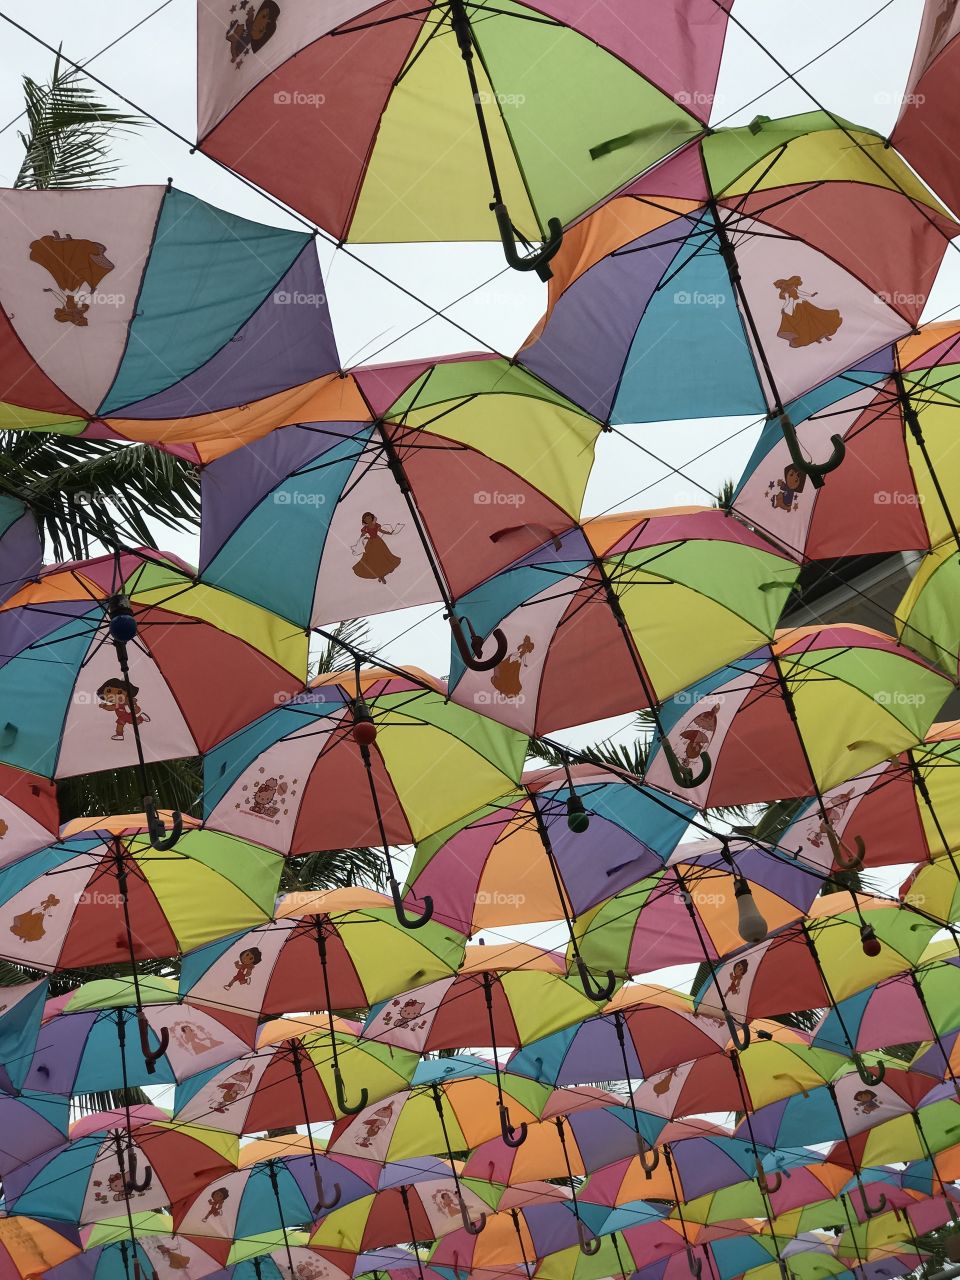 Umbrellas in the sky with a dancing lady design in each umbrella.